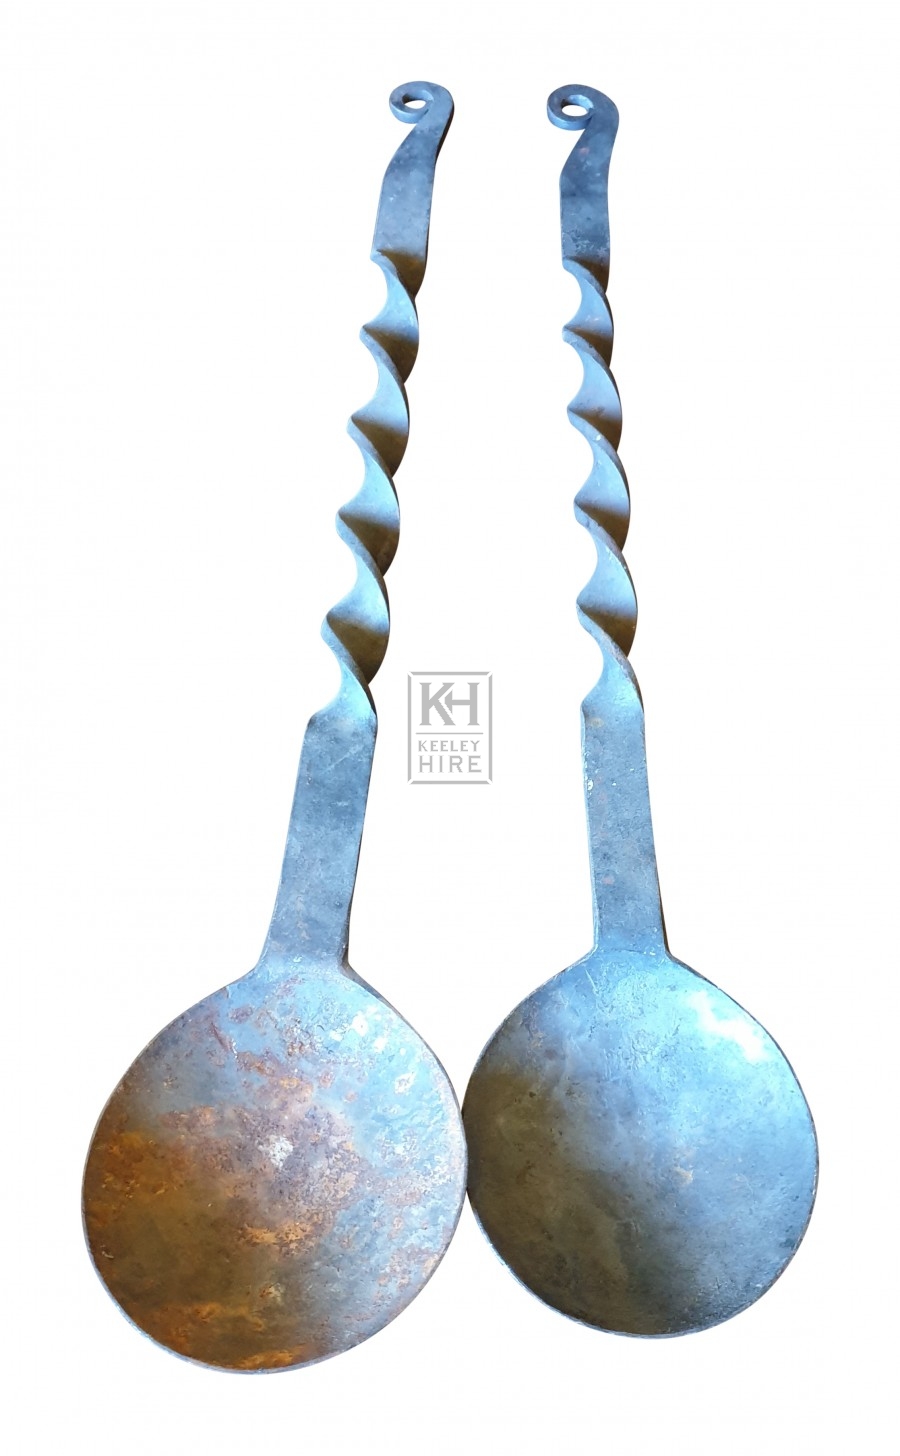 Large twisted handle iron spoon